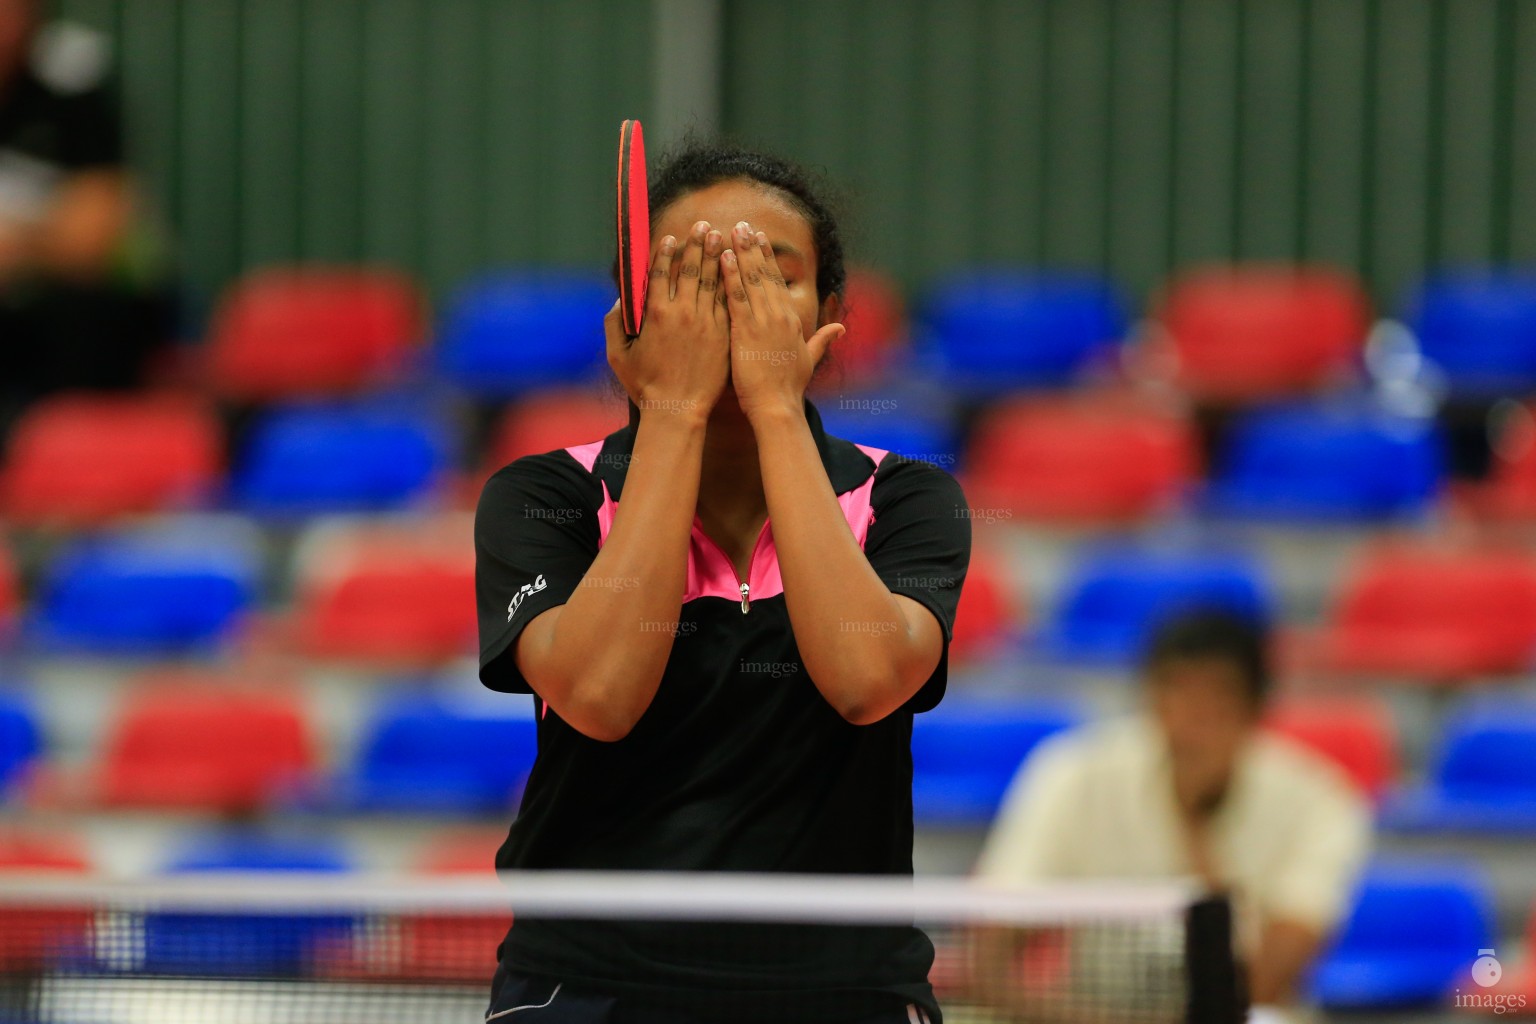 Maldives Table Tennis player, Fathimath Jumana Nimal reacts after losing a point in Indian Ocean Island Games, La Reunion, Monday, August. 3, 2015.  (Images.mv Photo/ Hussain Sinan).